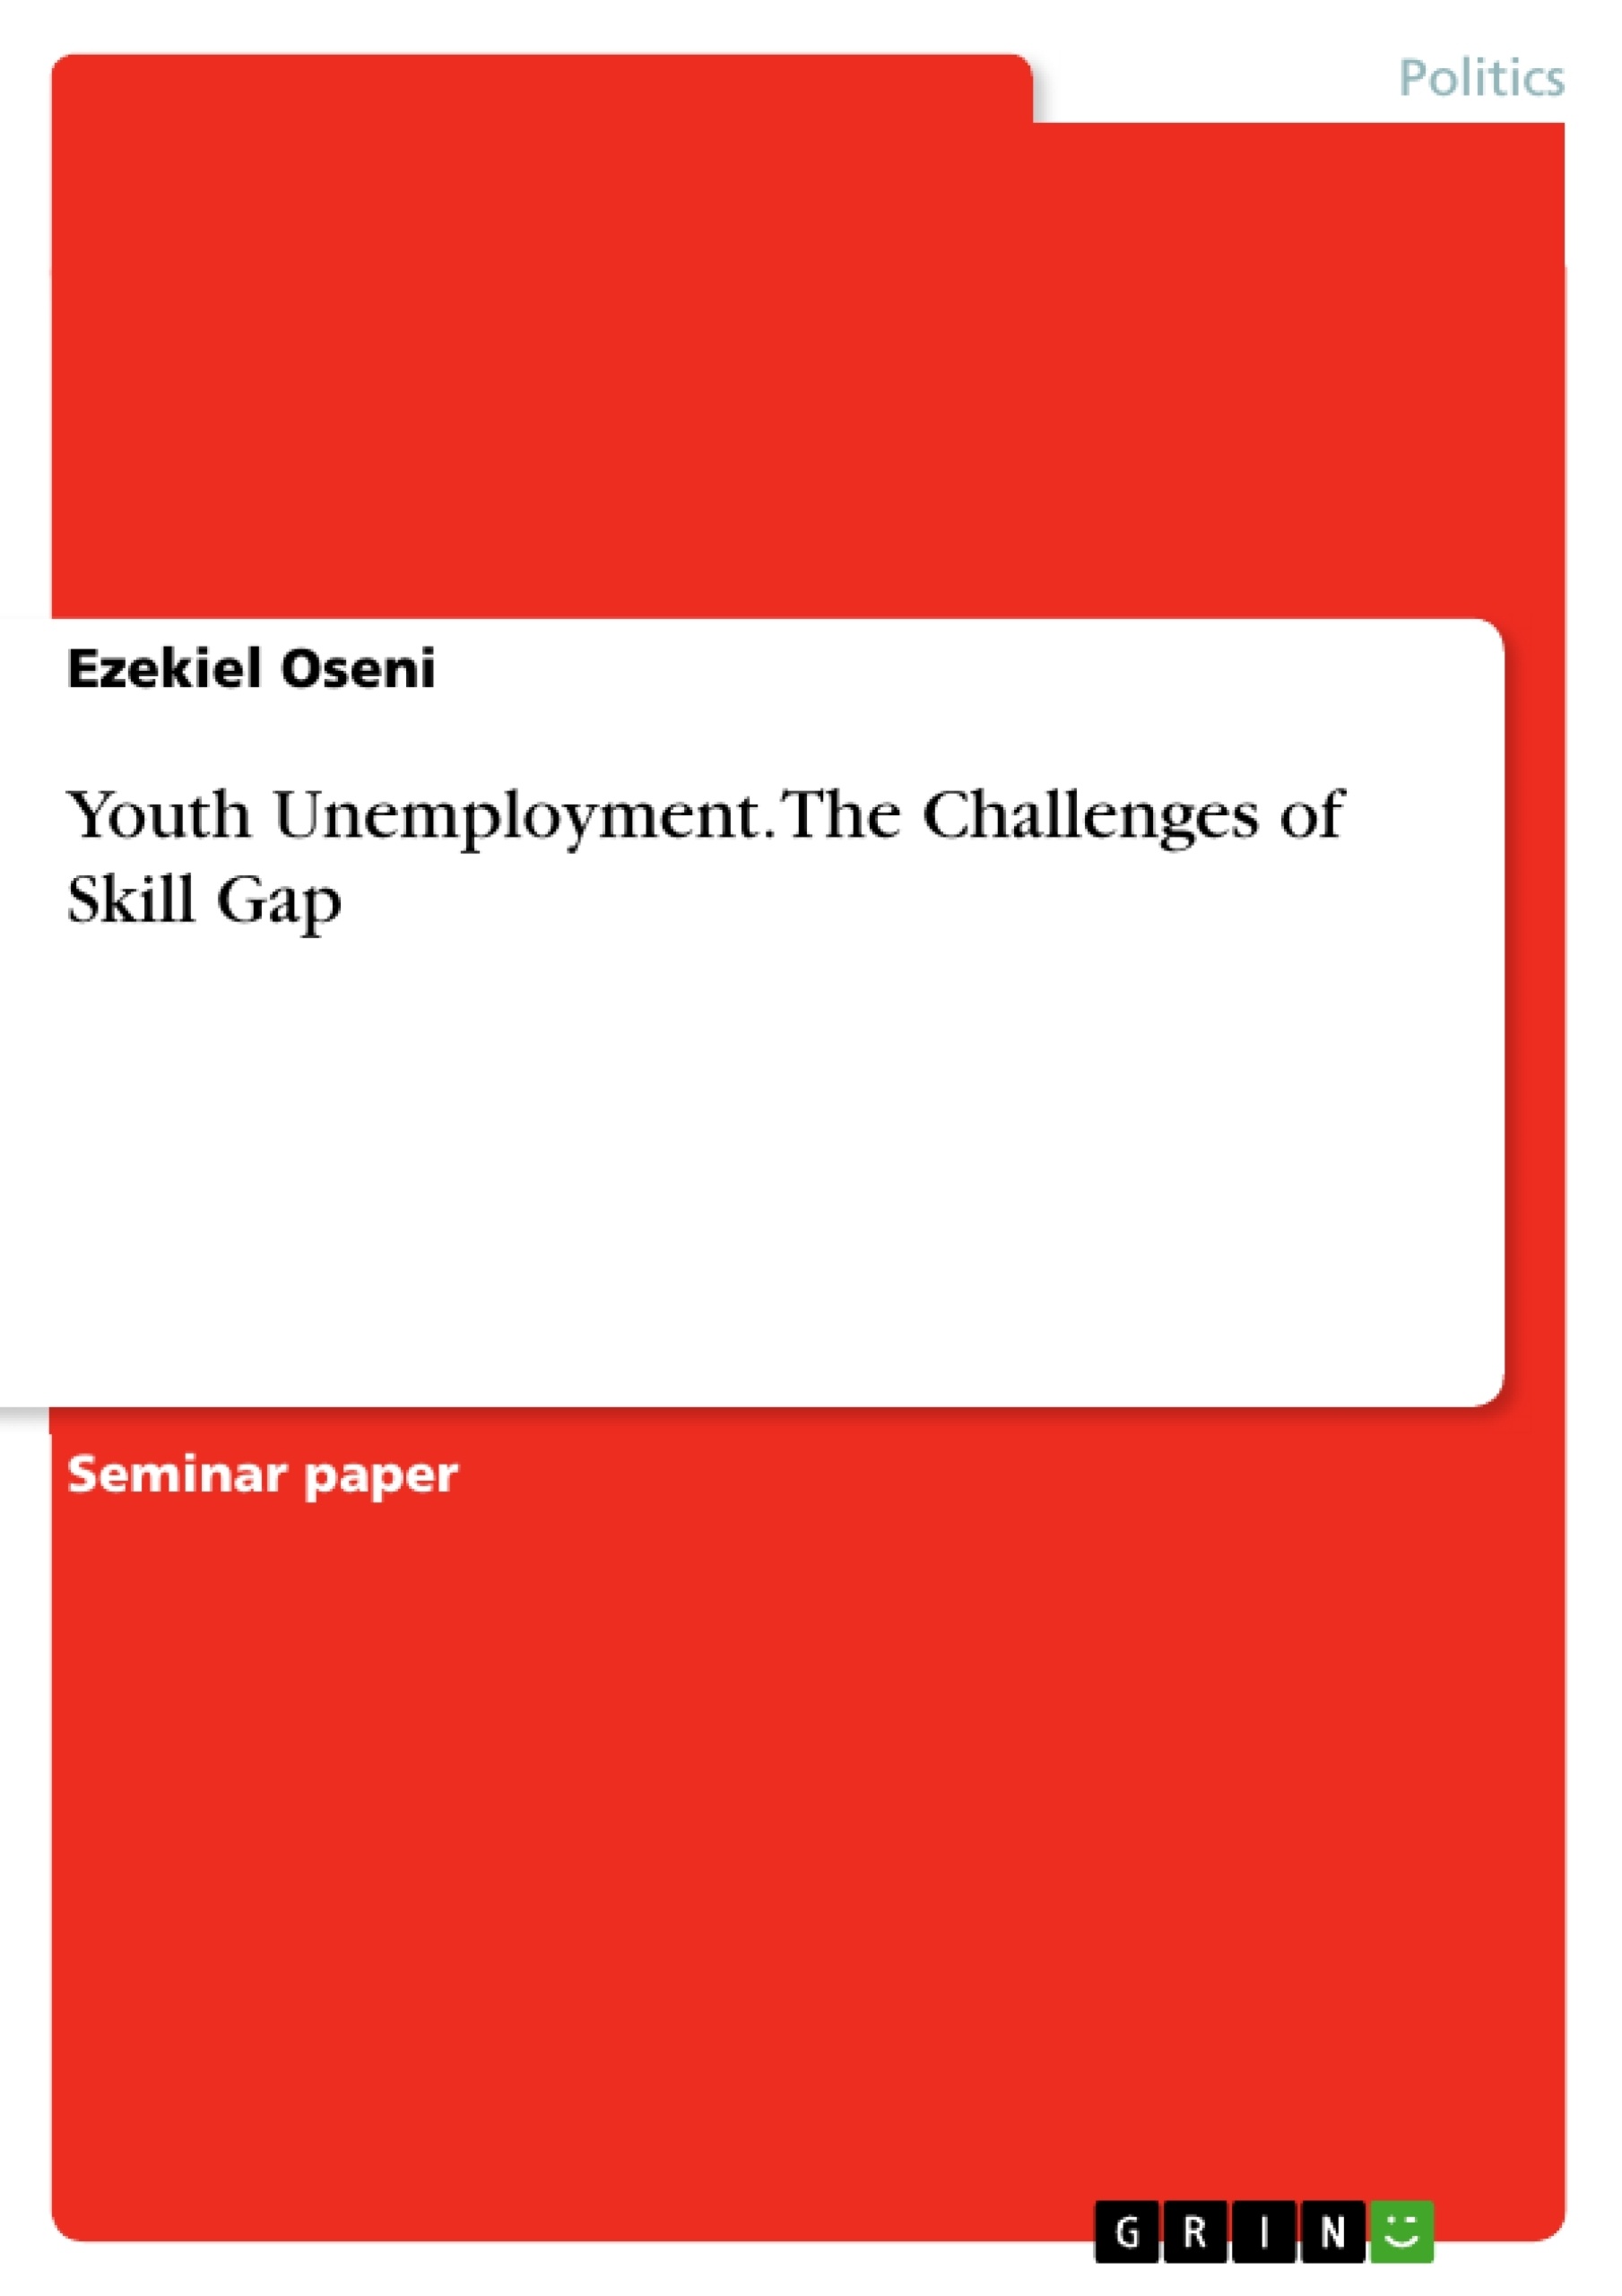 Título: Youth Unemployment. The Challenges of Skill Gap